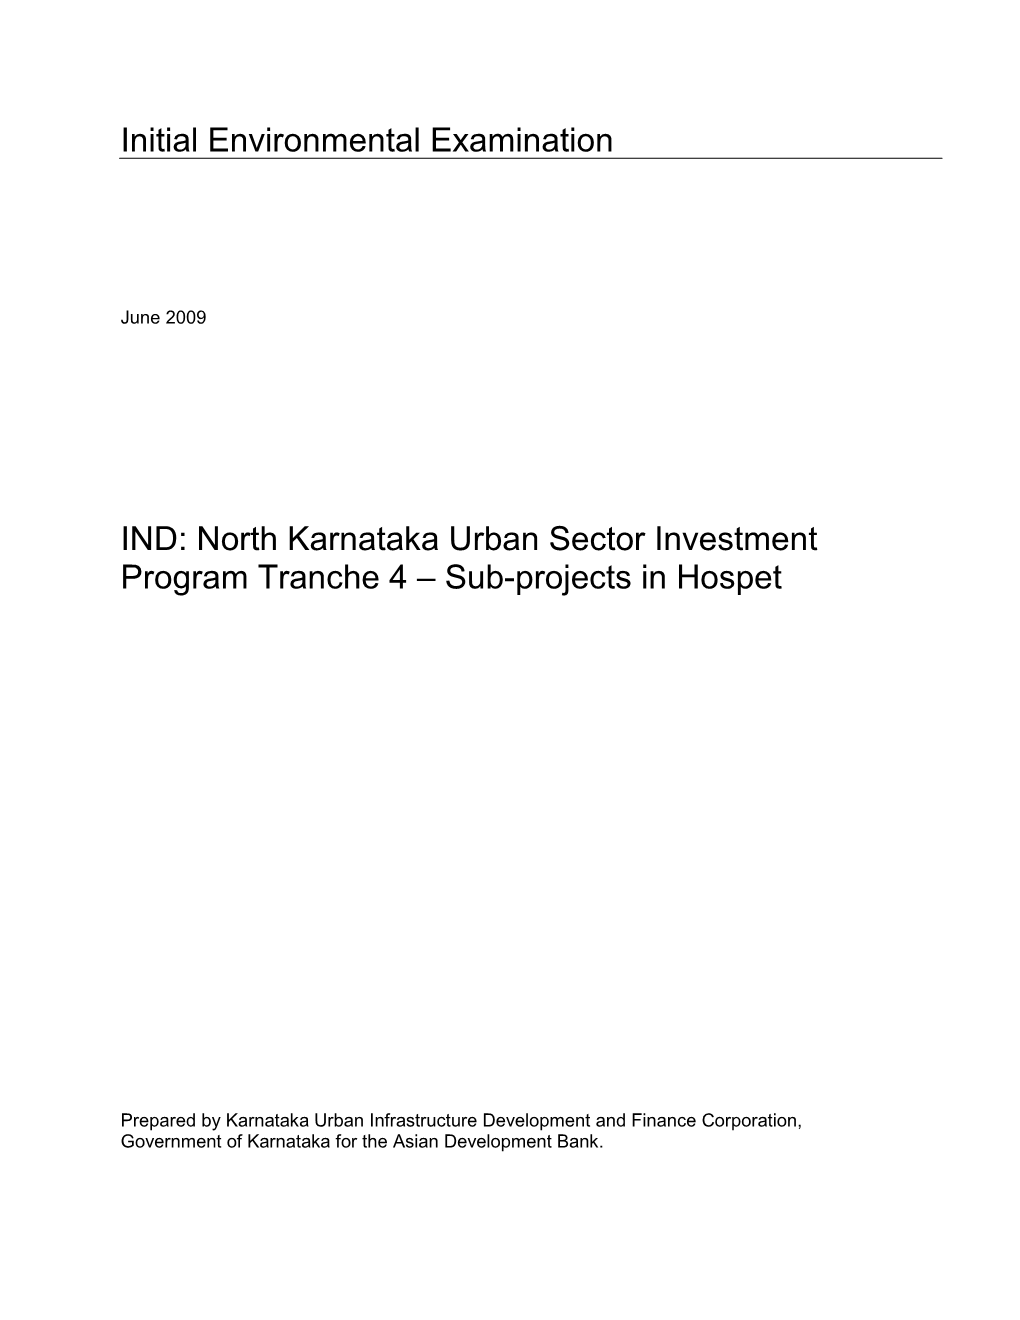 IND: North Karnataka Urban Sector Investment Program Tranche 4 – Sub-Projects in Hospet